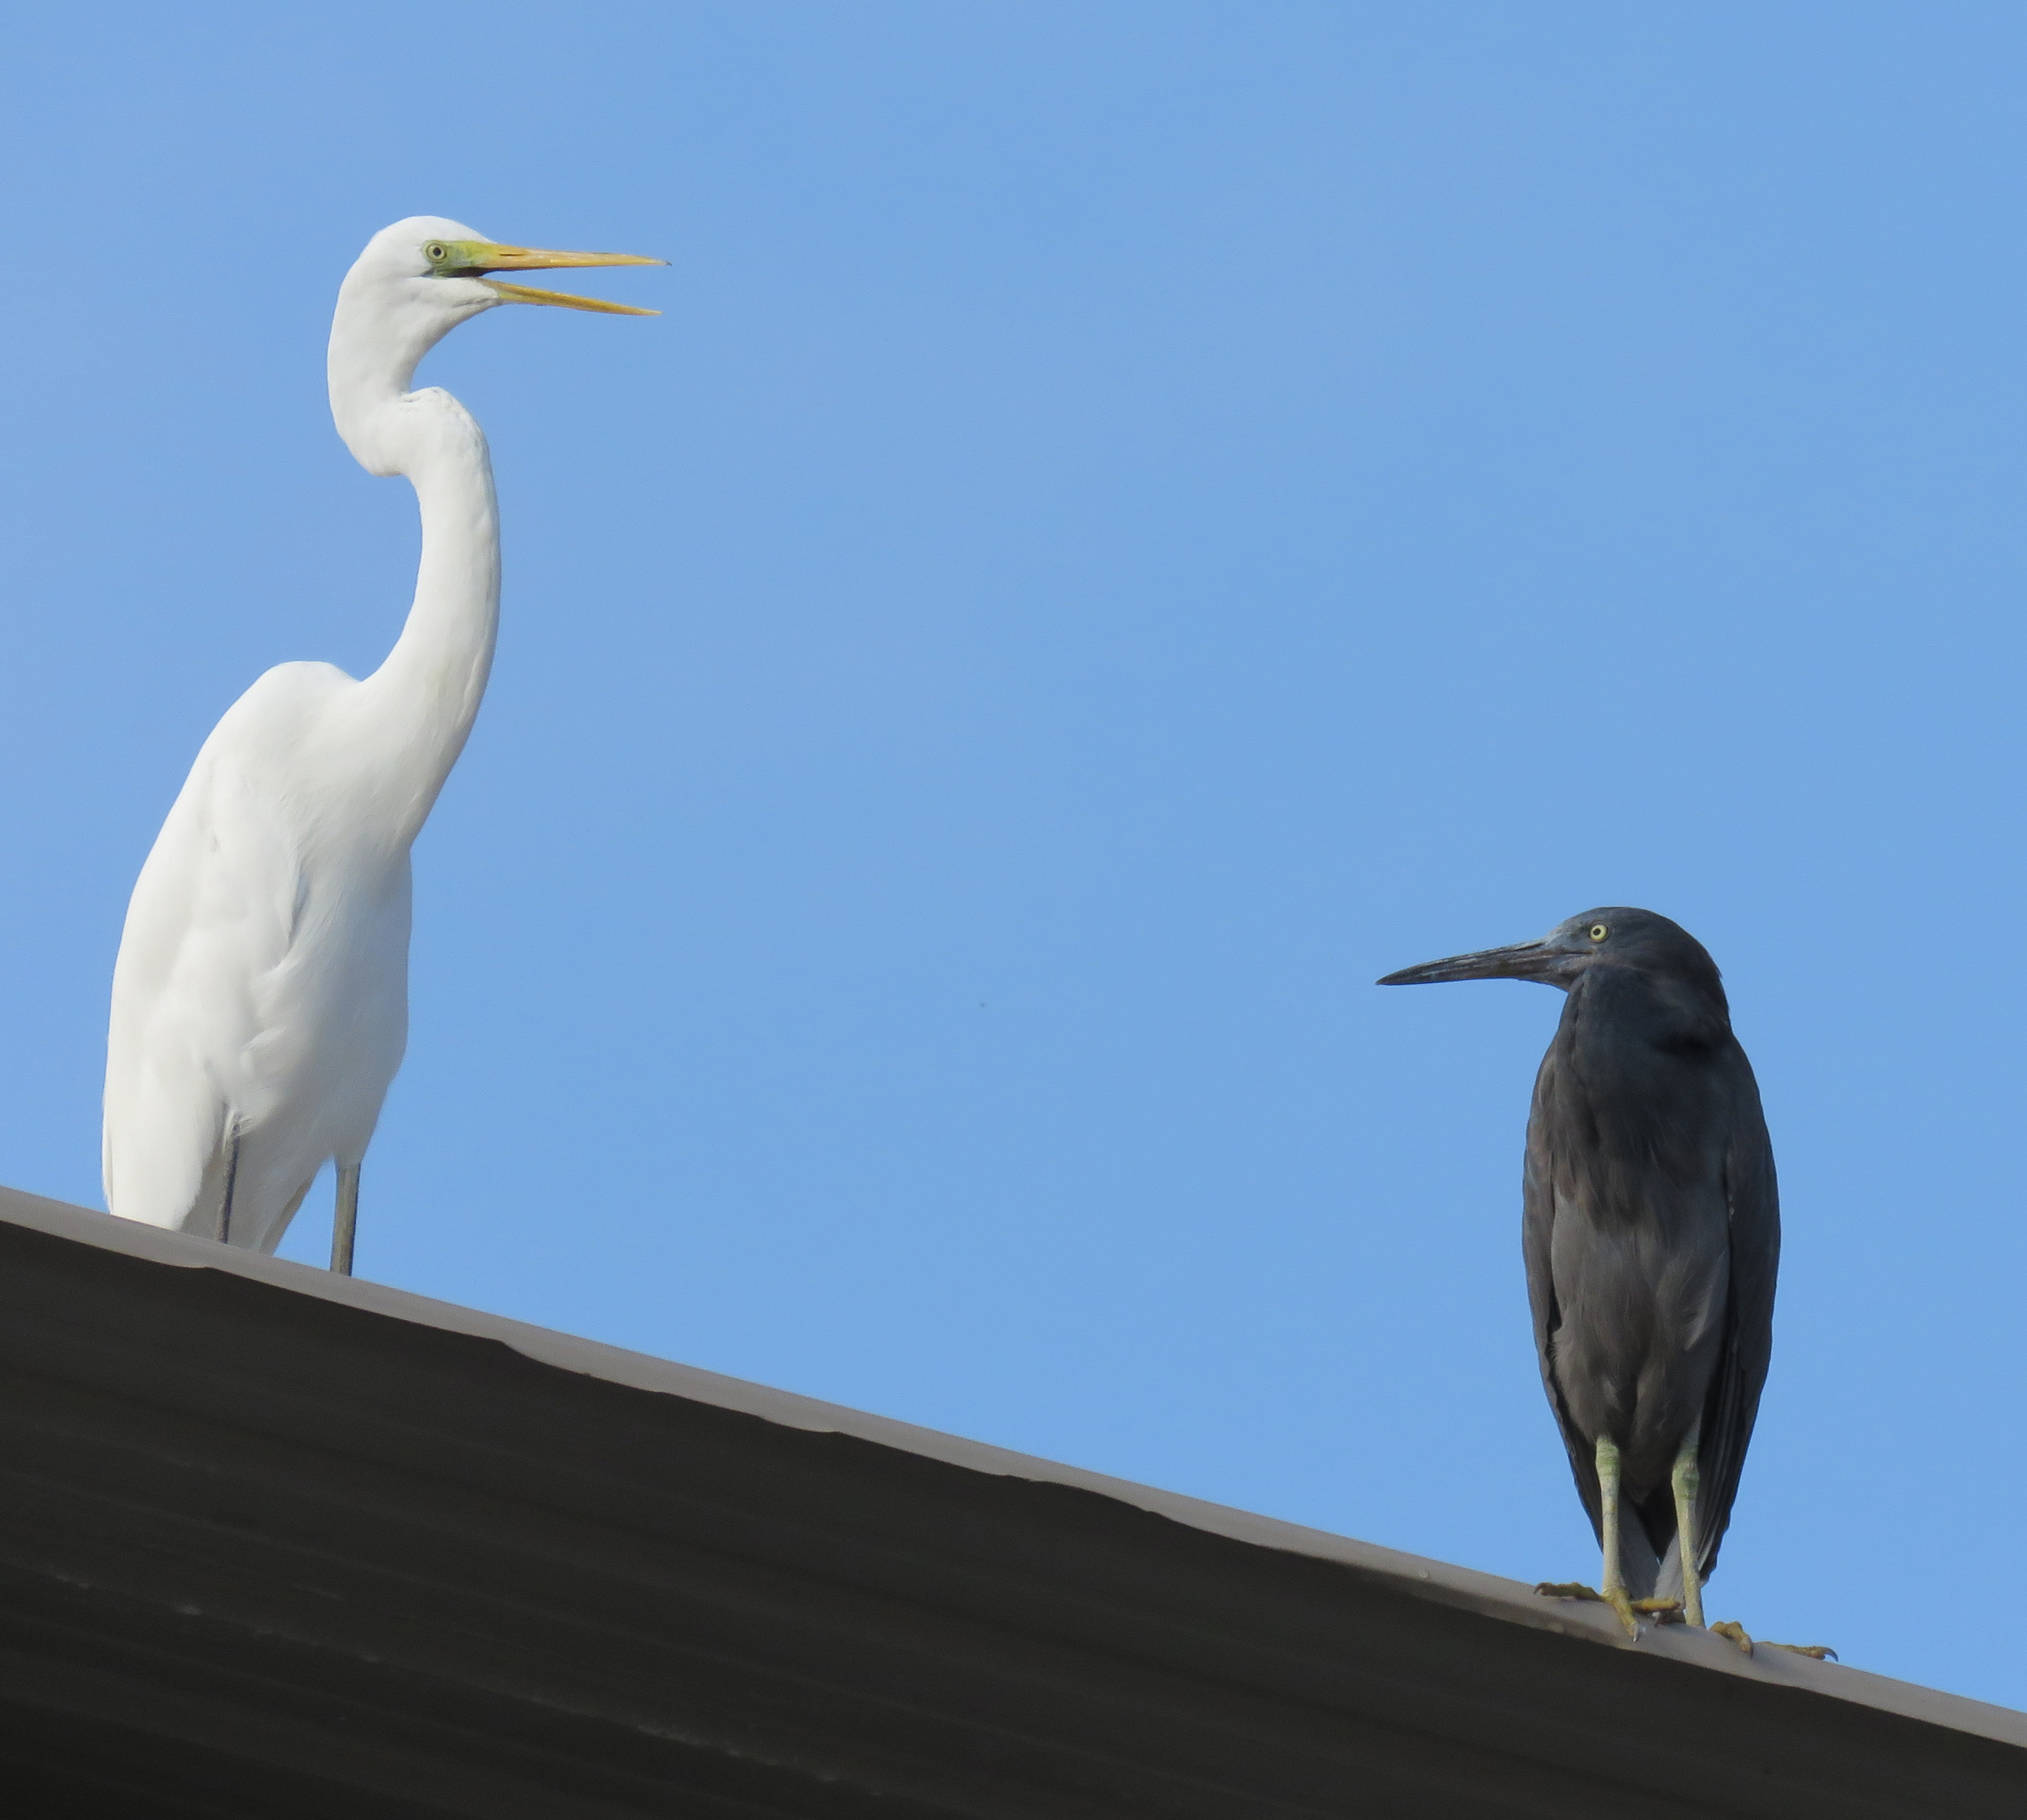 Roof-top Egrets. Photo by Randy Weisser.